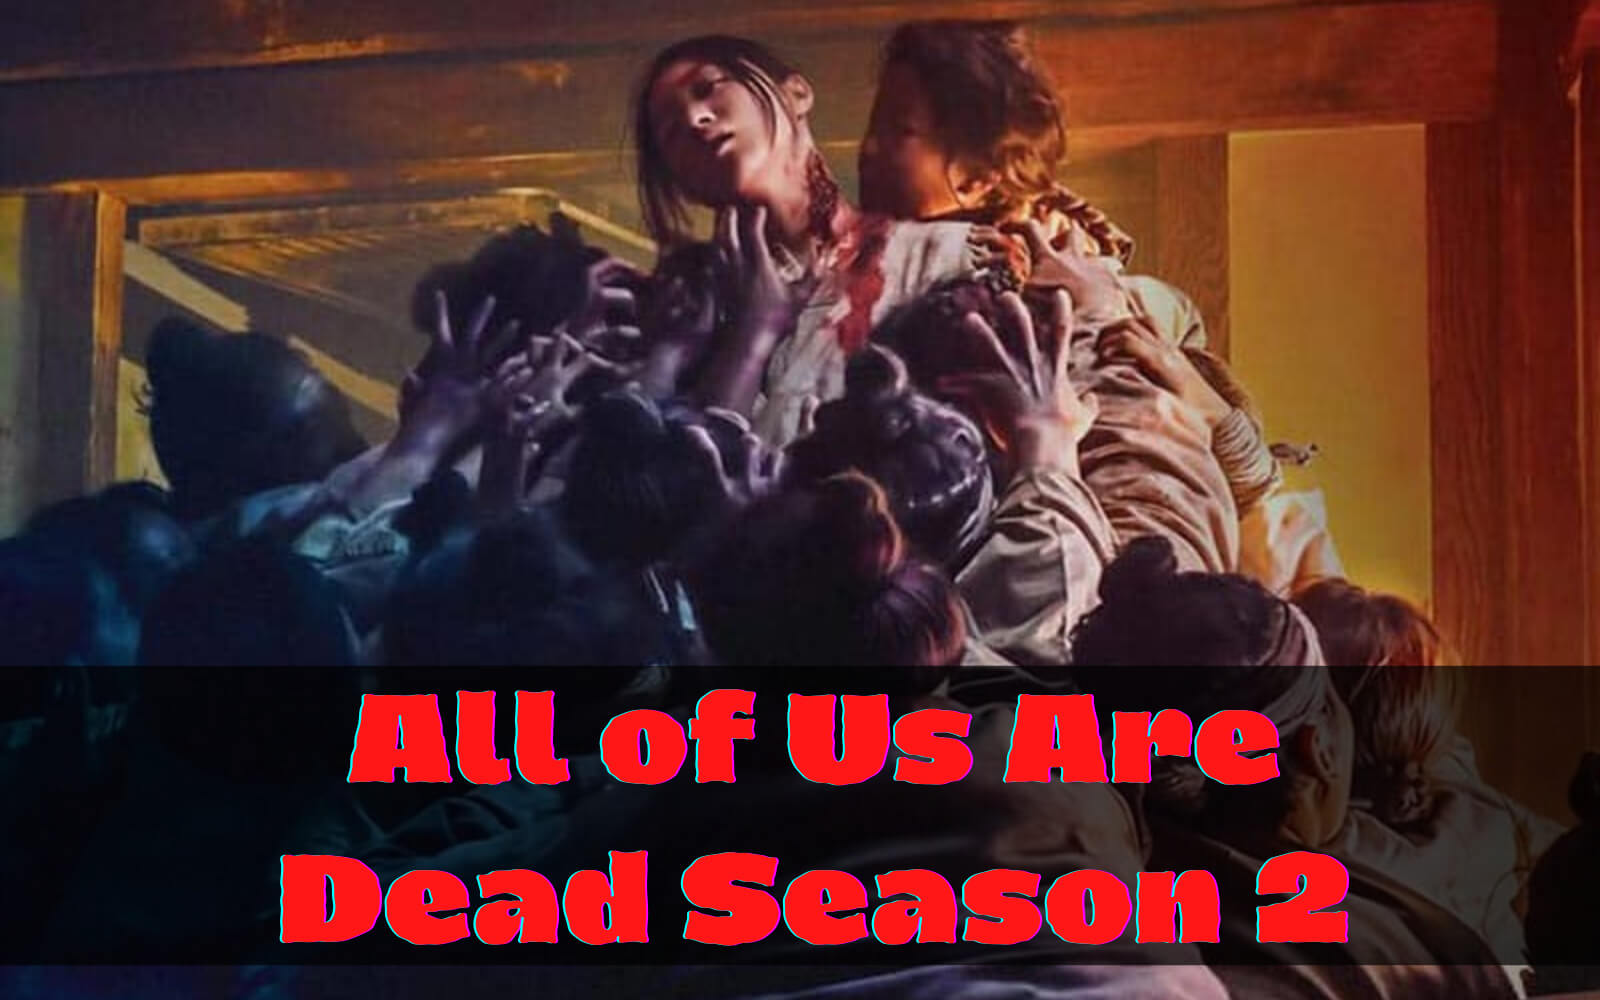 All of Us Are Dead season 2 on Netflix potential release date